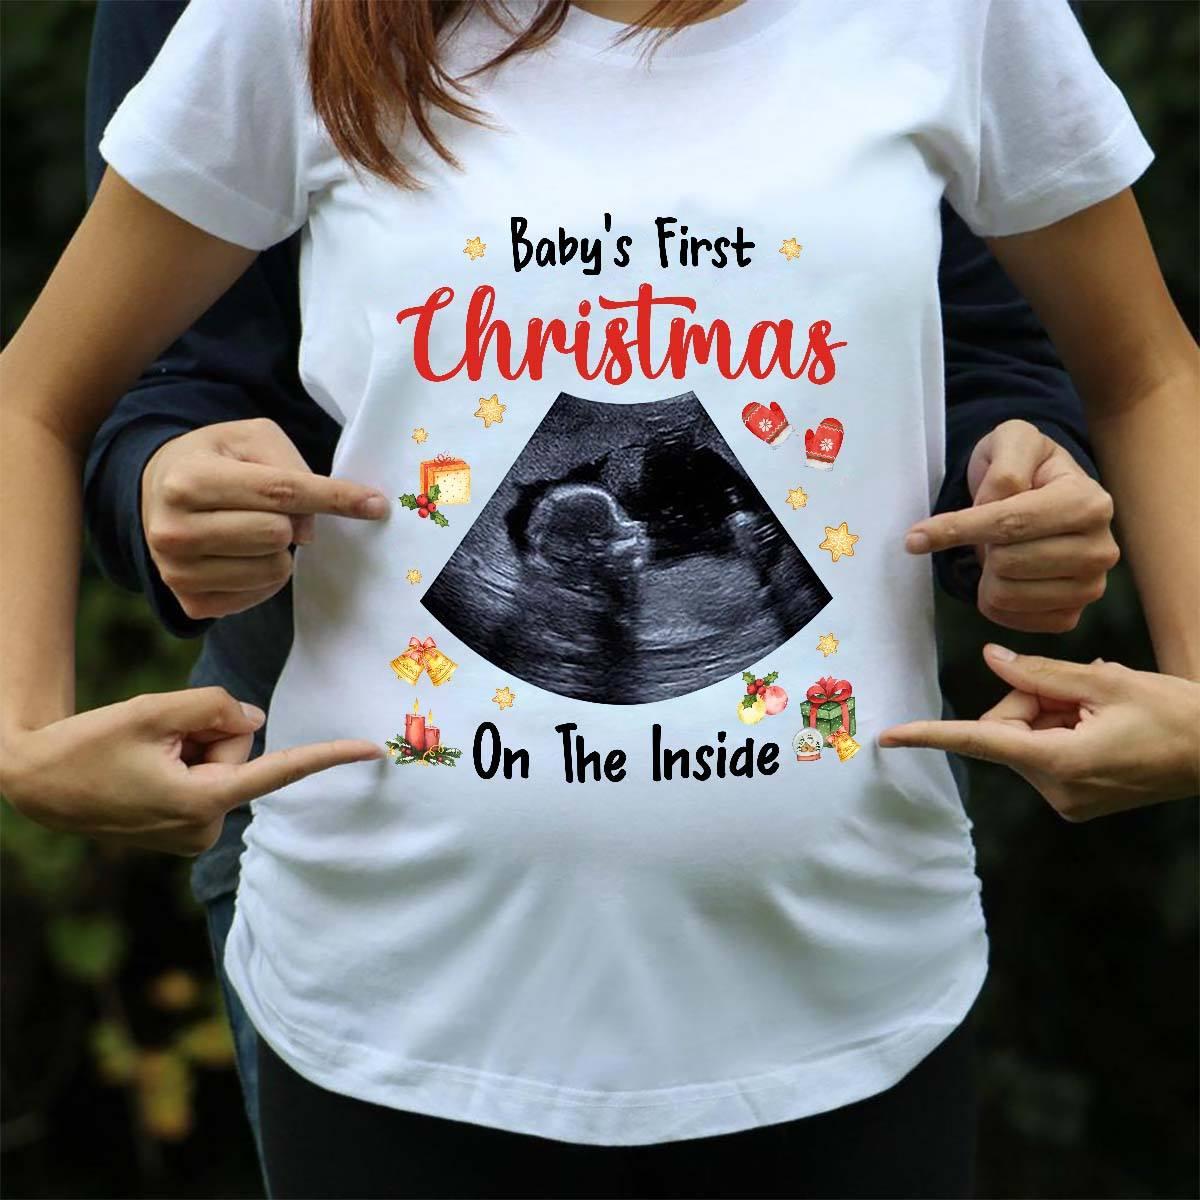 Baby's first christmas on the inside - Gift for mother, Christmas gift of mother